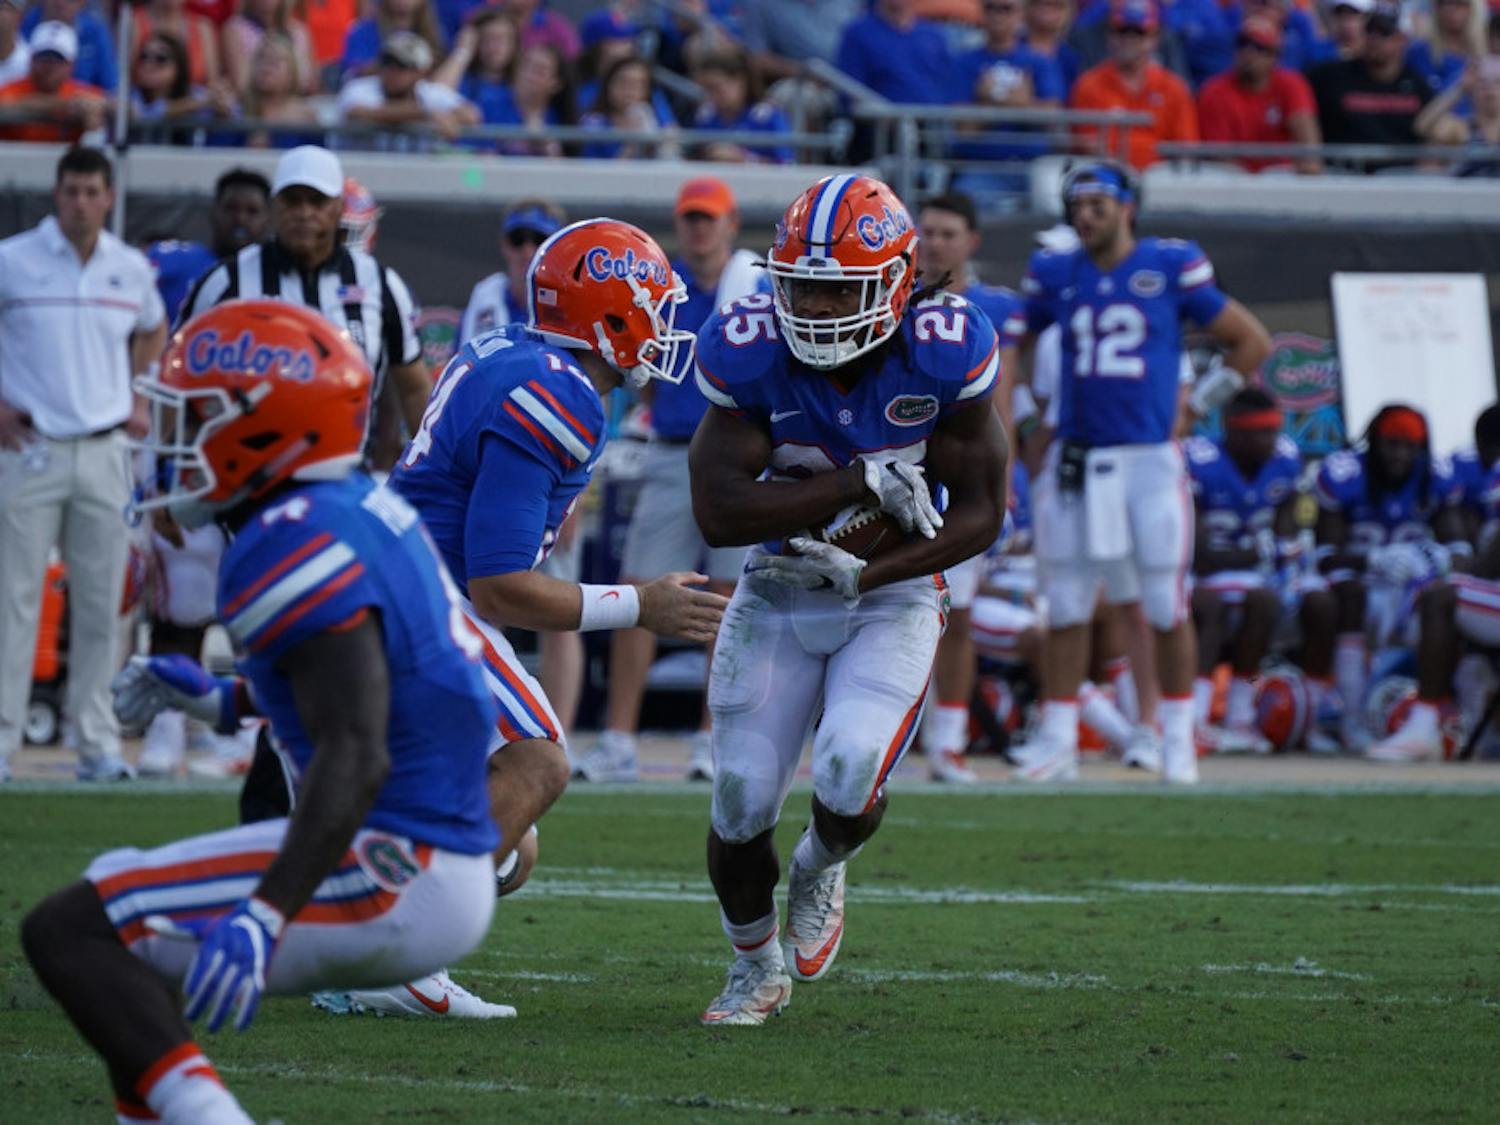 Jordan Scarlett runs with the ball during Florida's 24-10 win against Georgia on Oct. 29, 2016, at EverBank Field in Jacksonville.